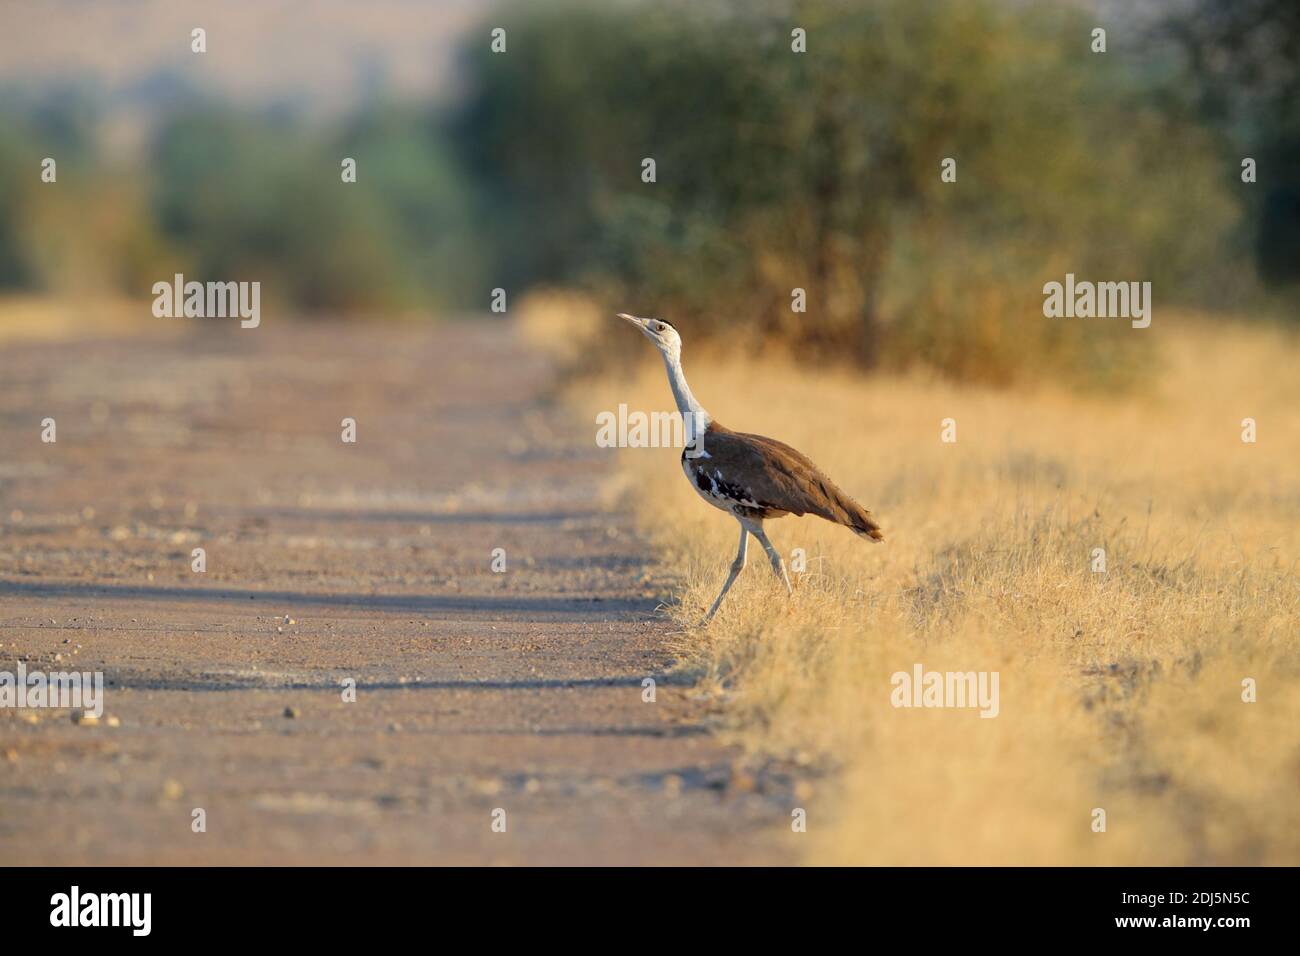 A critically endangered Great Indian Bustard (Ardeotis nigriceps) in Desert National Park, Rajasthan, India Stock Photo